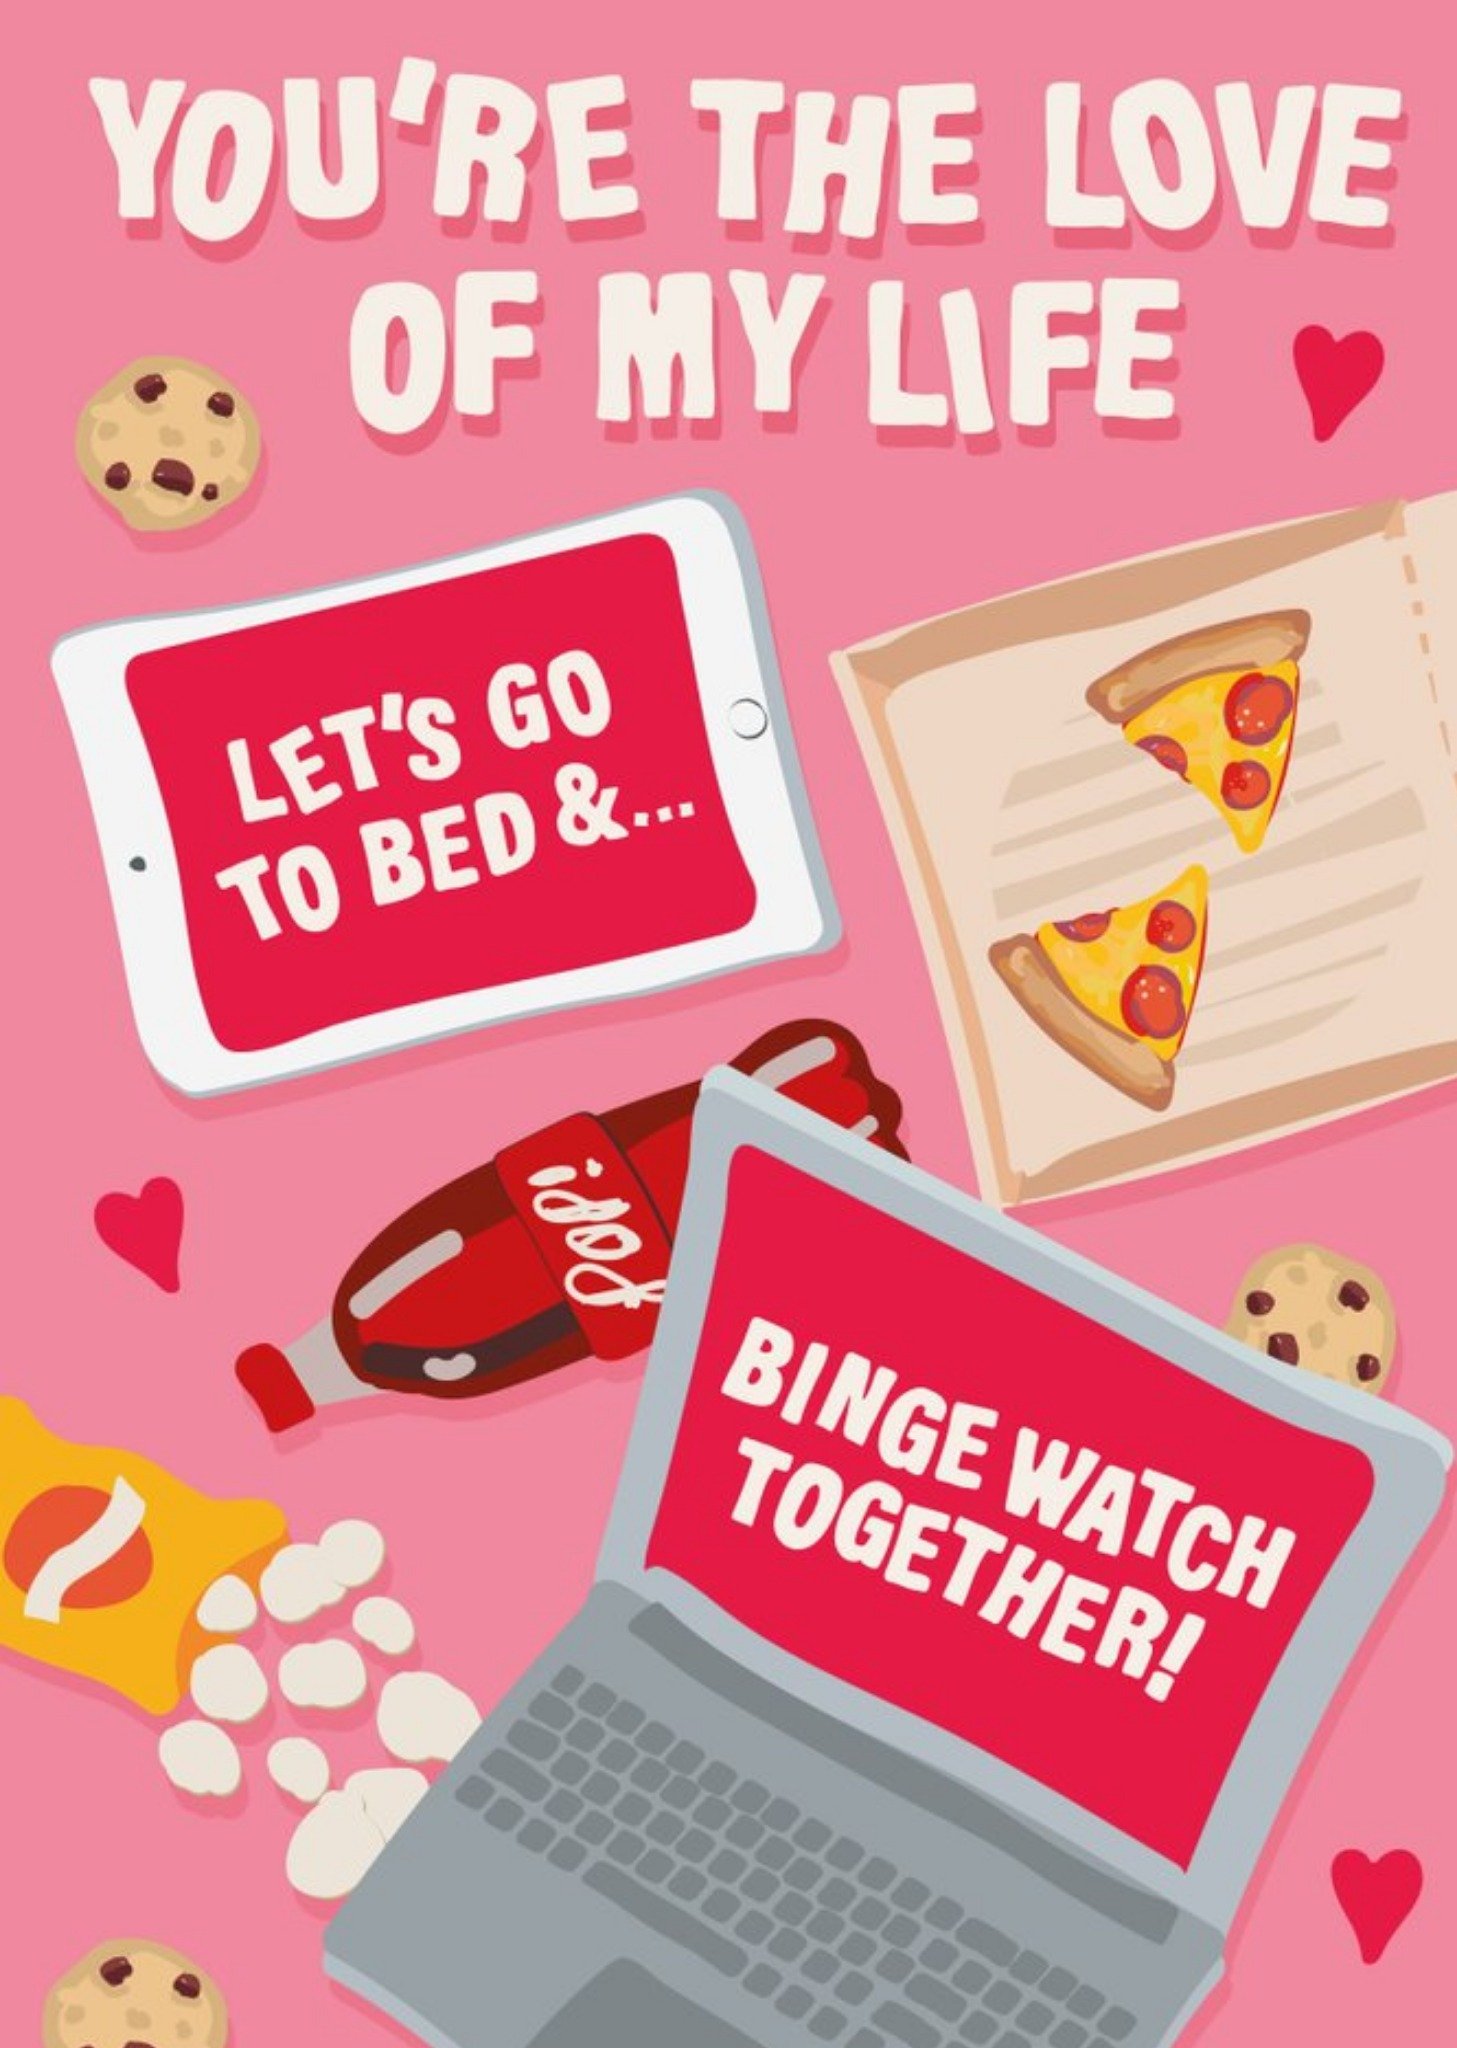 Moonpig Funny Let's Go To Bed & Binge Watch Together Valentine's Day Card Ecard